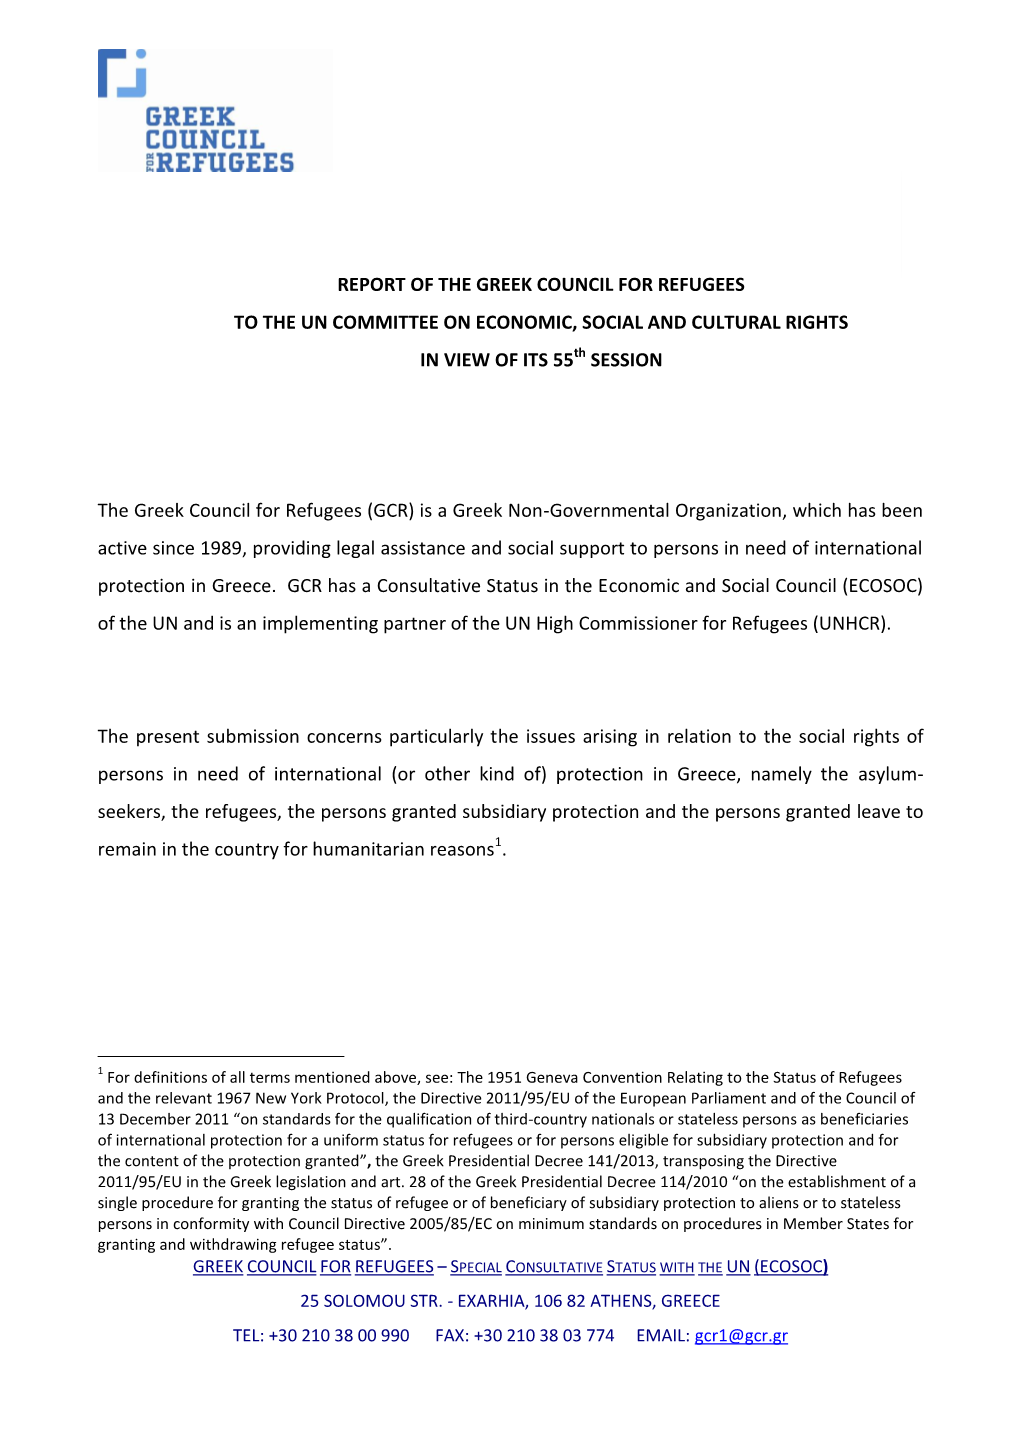 REPORT of the GREEK COUNCIL for REFUGEES to the UN COMMITTEE on ECONOMIC, SOCIAL and CULTURAL RIGHTS in VIEW of ITS 55Th SESSION